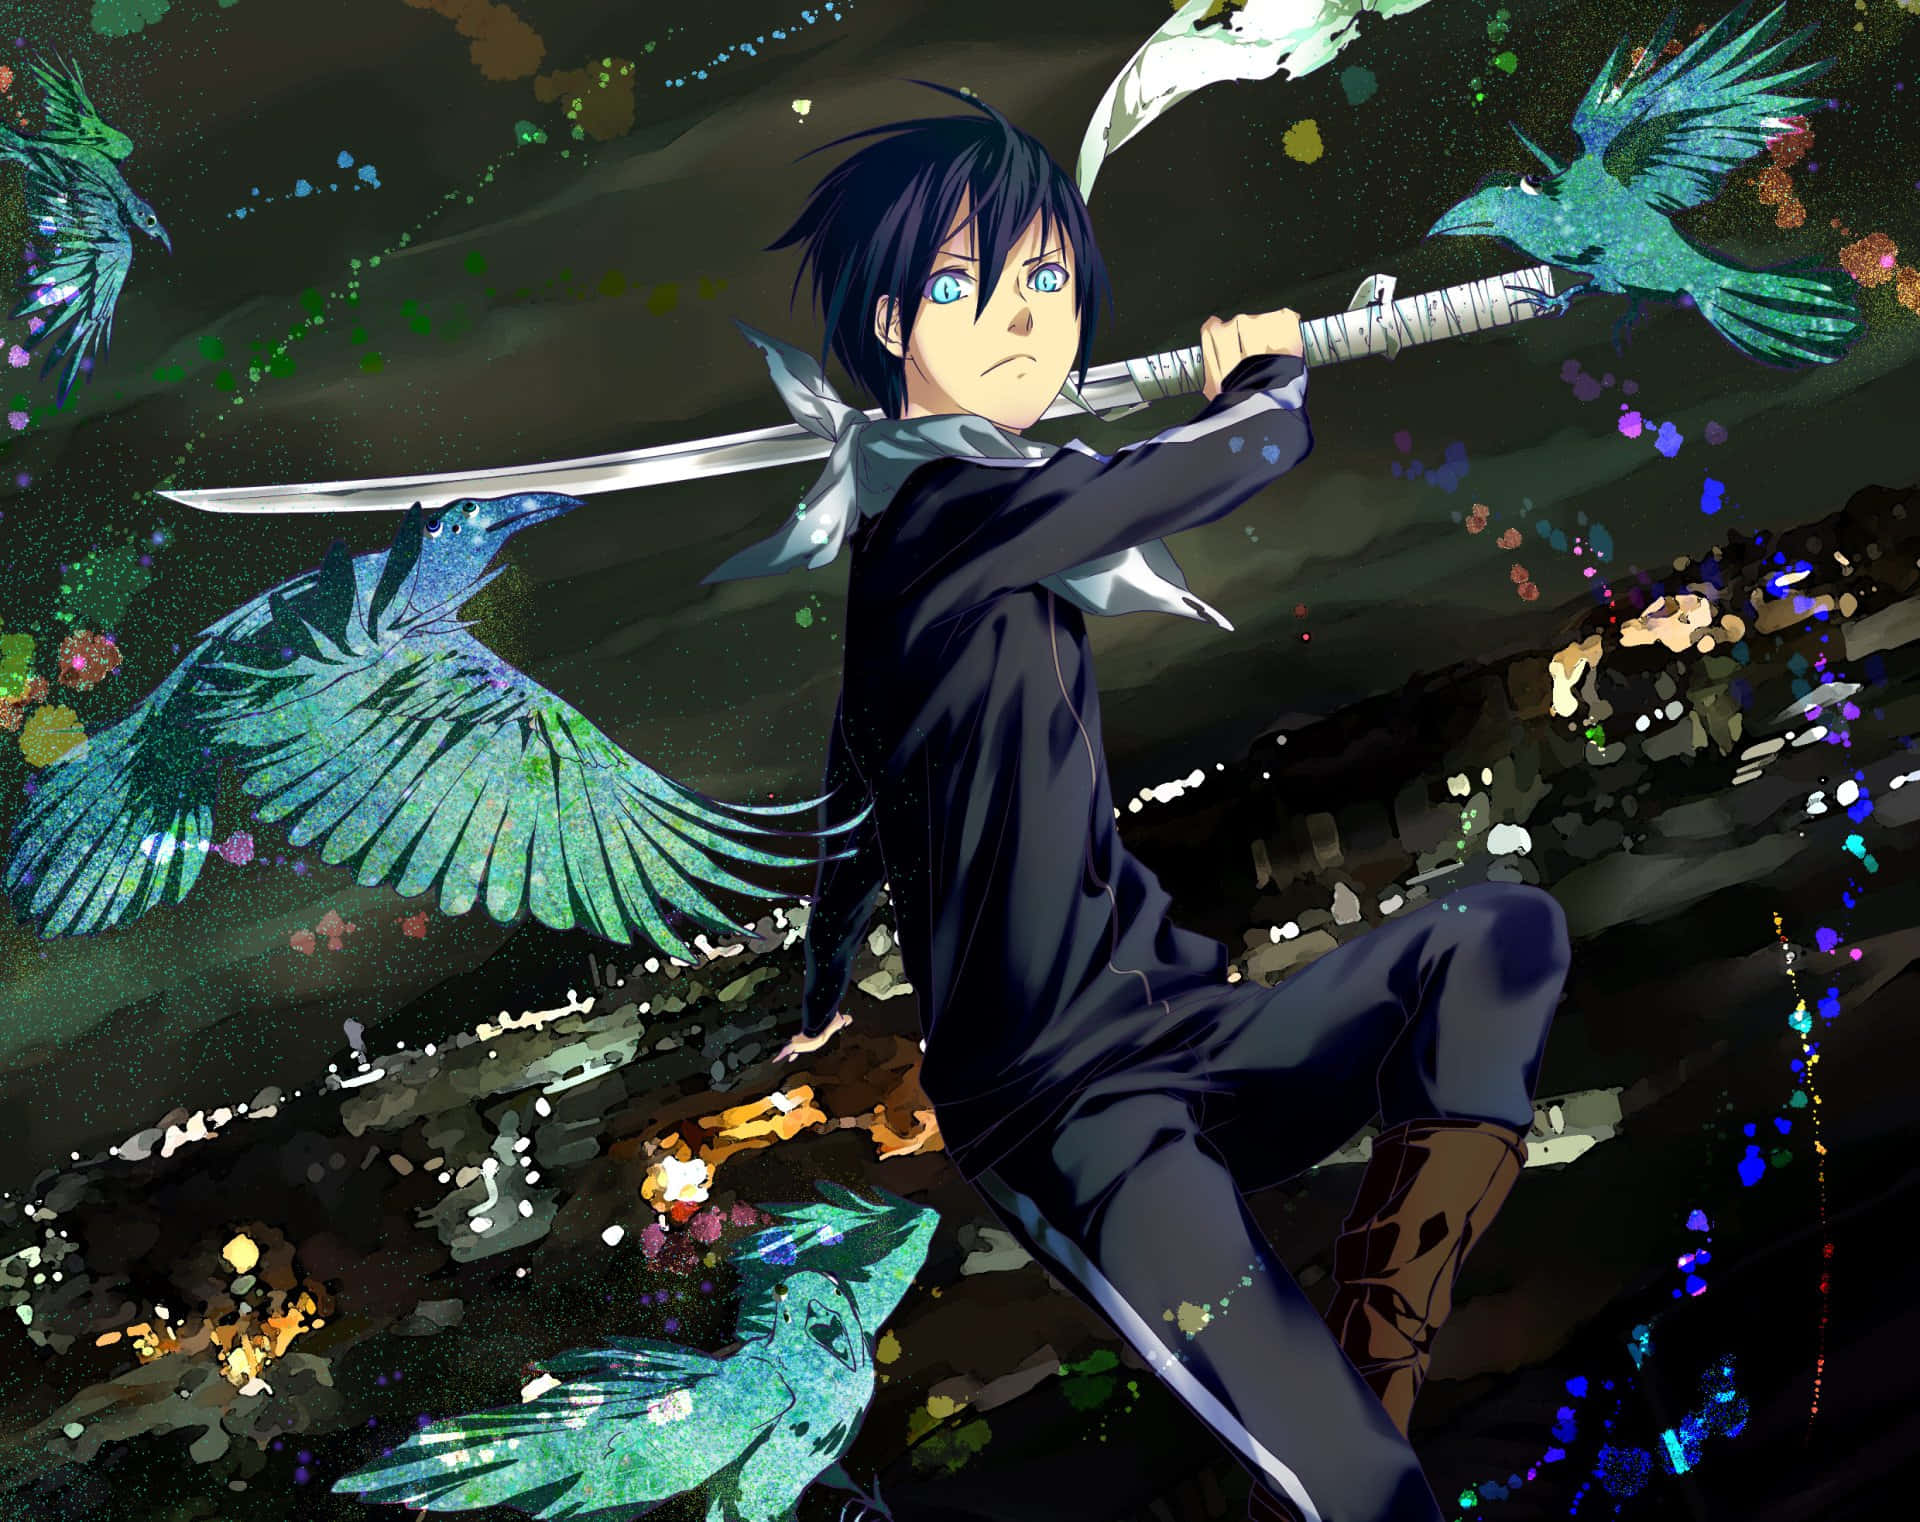 Explore the Otherworld with Noragami